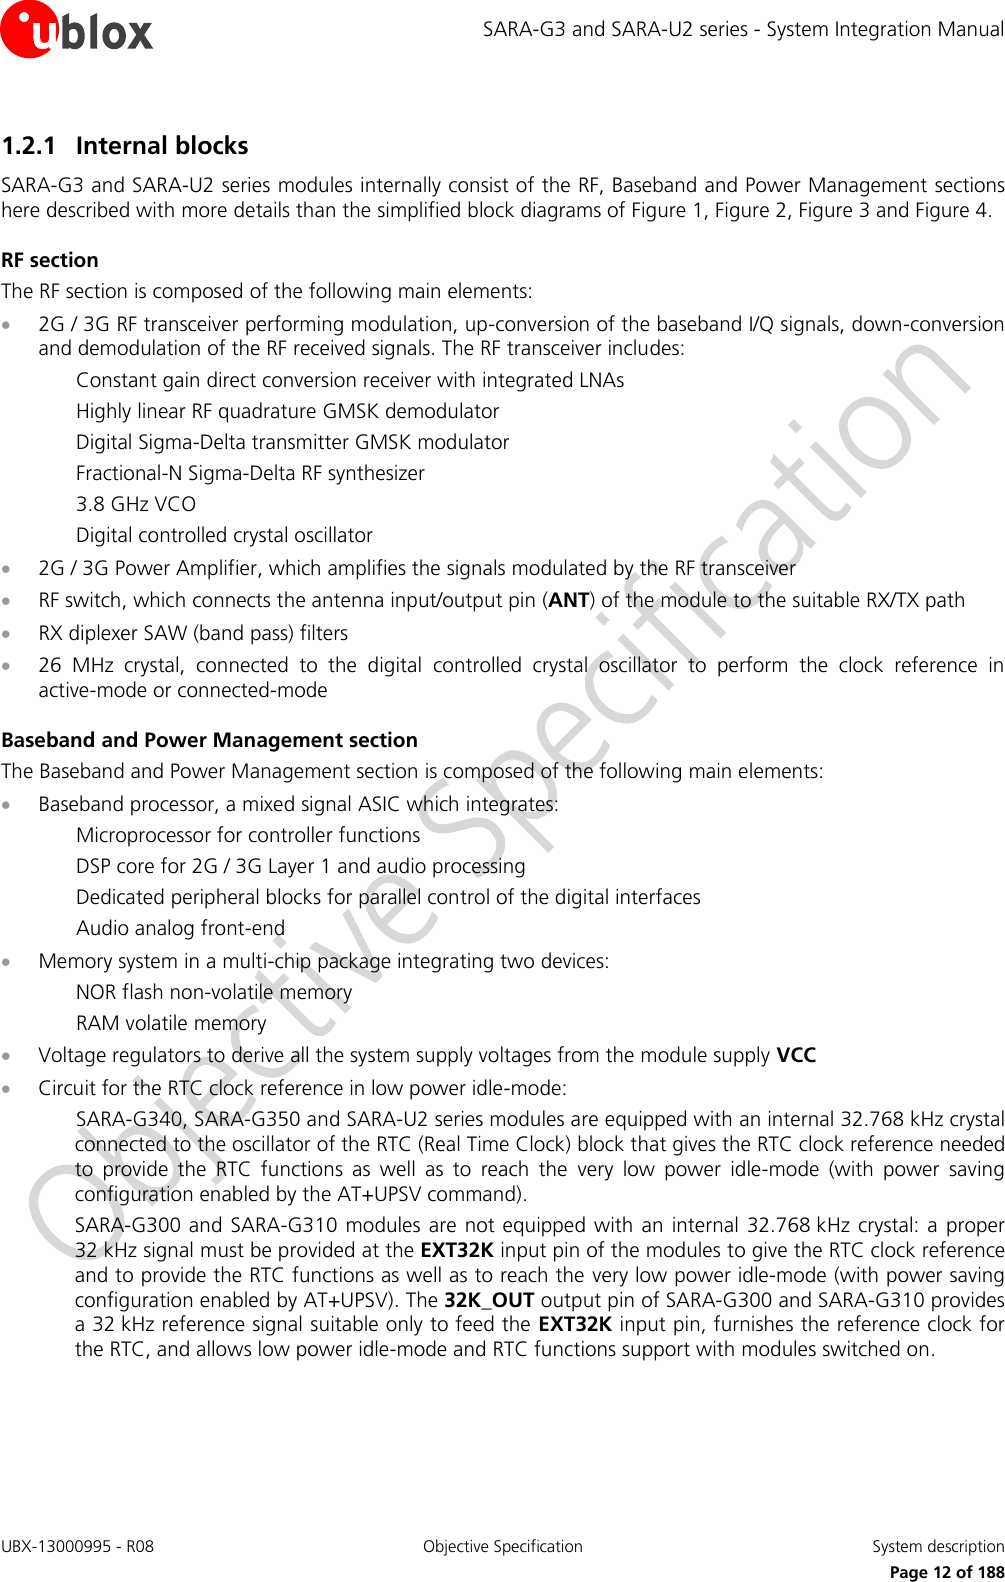 SARA-G3 and SARA-U2 series - System Integration Manual UBX-13000995 - R08  Objective Specification  System description     Page 12 of 188 1.2.1 Internal blocks SARA-G3 and SARA-U2 series modules internally consist of the RF, Baseband and Power Management sections here described with more details than the simplified block diagrams of Figure 1, Figure 2, Figure 3 and Figure 4. RF section The RF section is composed of the following main elements:  2G / 3G RF transceiver performing modulation, up-conversion of the baseband I/Q signals, down-conversion and demodulation of the RF received signals. The RF transceiver includes: Constant gain direct conversion receiver with integrated LNAs Highly linear RF quadrature GMSK demodulator Digital Sigma-Delta transmitter GMSK modulator Fractional-N Sigma-Delta RF synthesizer 3.8 GHz VCO Digital controlled crystal oscillator  2G / 3G Power Amplifier, which amplifies the signals modulated by the RF transceiver  RF switch, which connects the antenna input/output pin (ANT) of the module to the suitable RX/TX path  RX diplexer SAW (band pass) filters  26  MHz  crystal,  connected  to  the  digital  controlled  crystal  oscillator  to  perform  the  clock  reference  in active-mode or connected-mode Baseband and Power Management section The Baseband and Power Management section is composed of the following main elements:  Baseband processor, a mixed signal ASIC which integrates: Microprocessor for controller functions DSP core for 2G / 3G Layer 1 and audio processing Dedicated peripheral blocks for parallel control of the digital interfaces Audio analog front-end  Memory system in a multi-chip package integrating two devices: NOR flash non-volatile memory RAM volatile memory  Voltage regulators to derive all the system supply voltages from the module supply VCC  Circuit for the RTC clock reference in low power idle-mode: SARA-G340, SARA-G350 and SARA-U2 series modules are equipped with an internal 32.768 kHz crystal connected to the oscillator of the RTC (Real Time Clock) block that gives the RTC clock reference needed to  provide  the  RTC  functions  as  well  as  to  reach  the  very  low  power  idle-mode  (with  power  saving configuration enabled by the AT+UPSV command). SARA-G300 and SARA-G310 modules are not equipped with  an internal 32.768 kHz crystal: a  proper 32 kHz signal must be provided at the EXT32K input pin of the modules to give the RTC clock reference and to provide the RTC functions as well as to reach the very low power idle-mode (with power saving configuration enabled by AT+UPSV). The 32K_OUT output pin of SARA-G300 and SARA-G310 provides a 32 kHz reference signal suitable only to feed the EXT32K input pin, furnishes the reference clock for the RTC, and allows low power idle-mode and RTC functions support with modules switched on.  